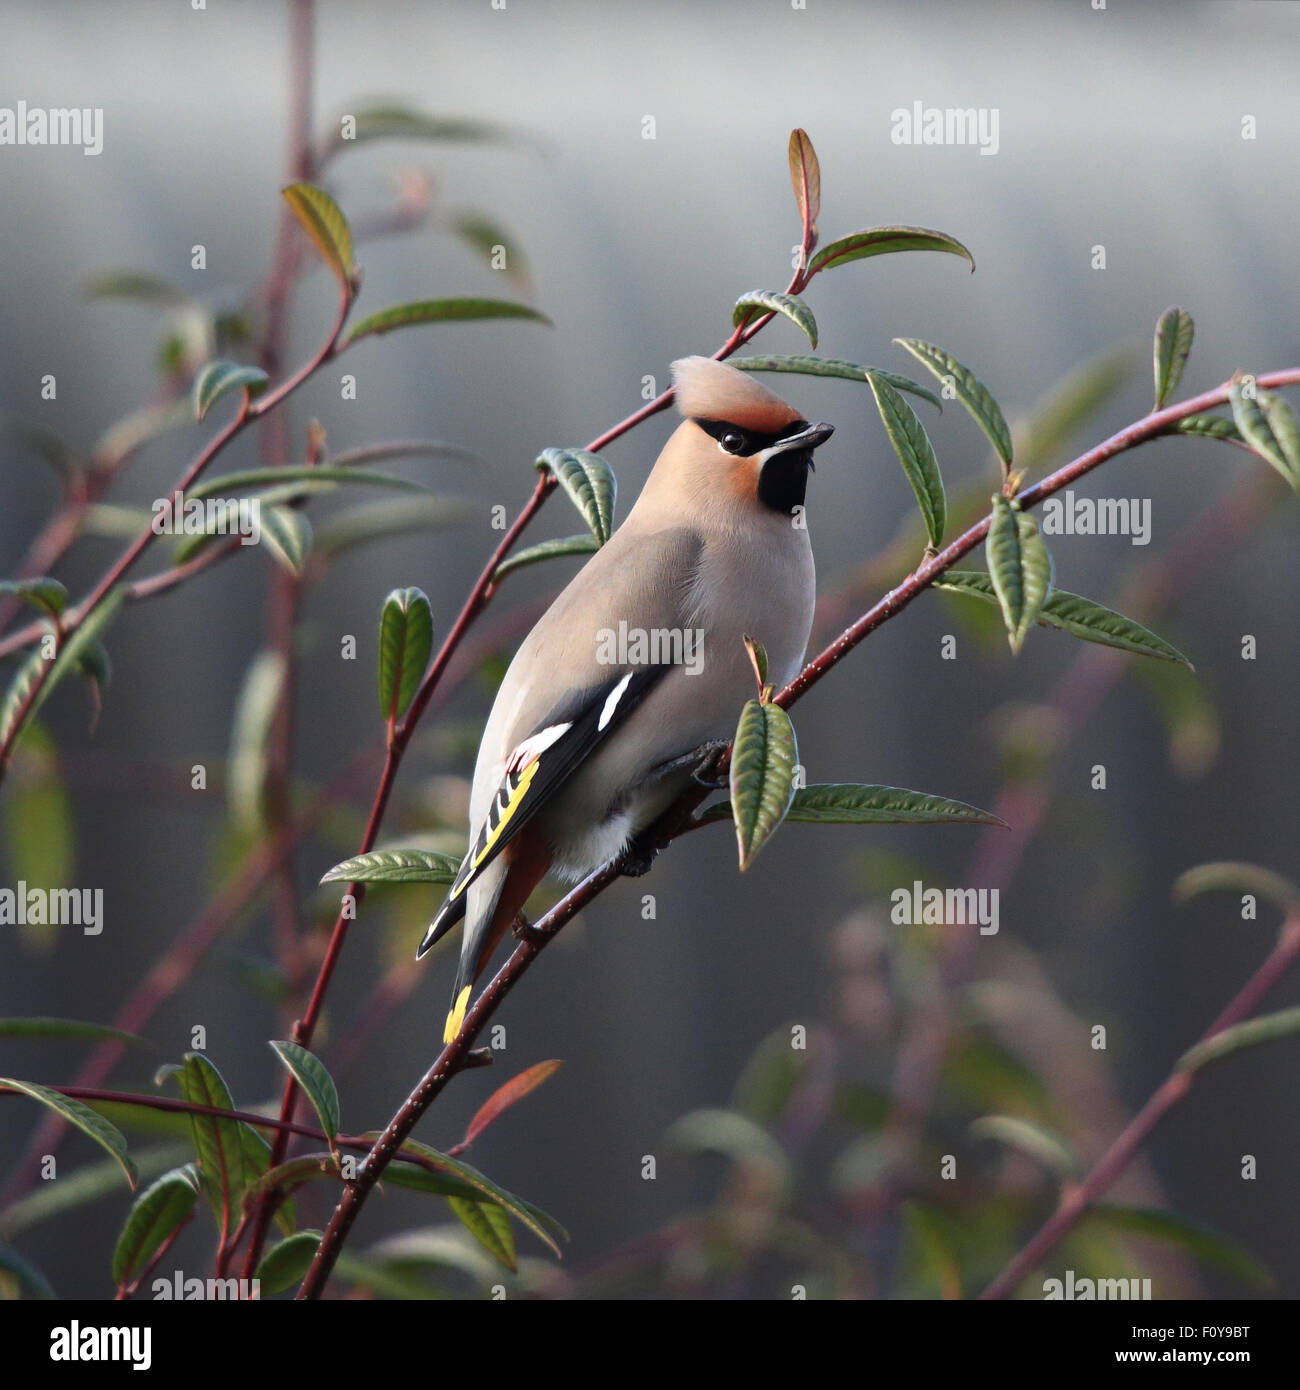 A lovely Bohemian Waxwing, also known simply as Waxwing, perched Stock Photo